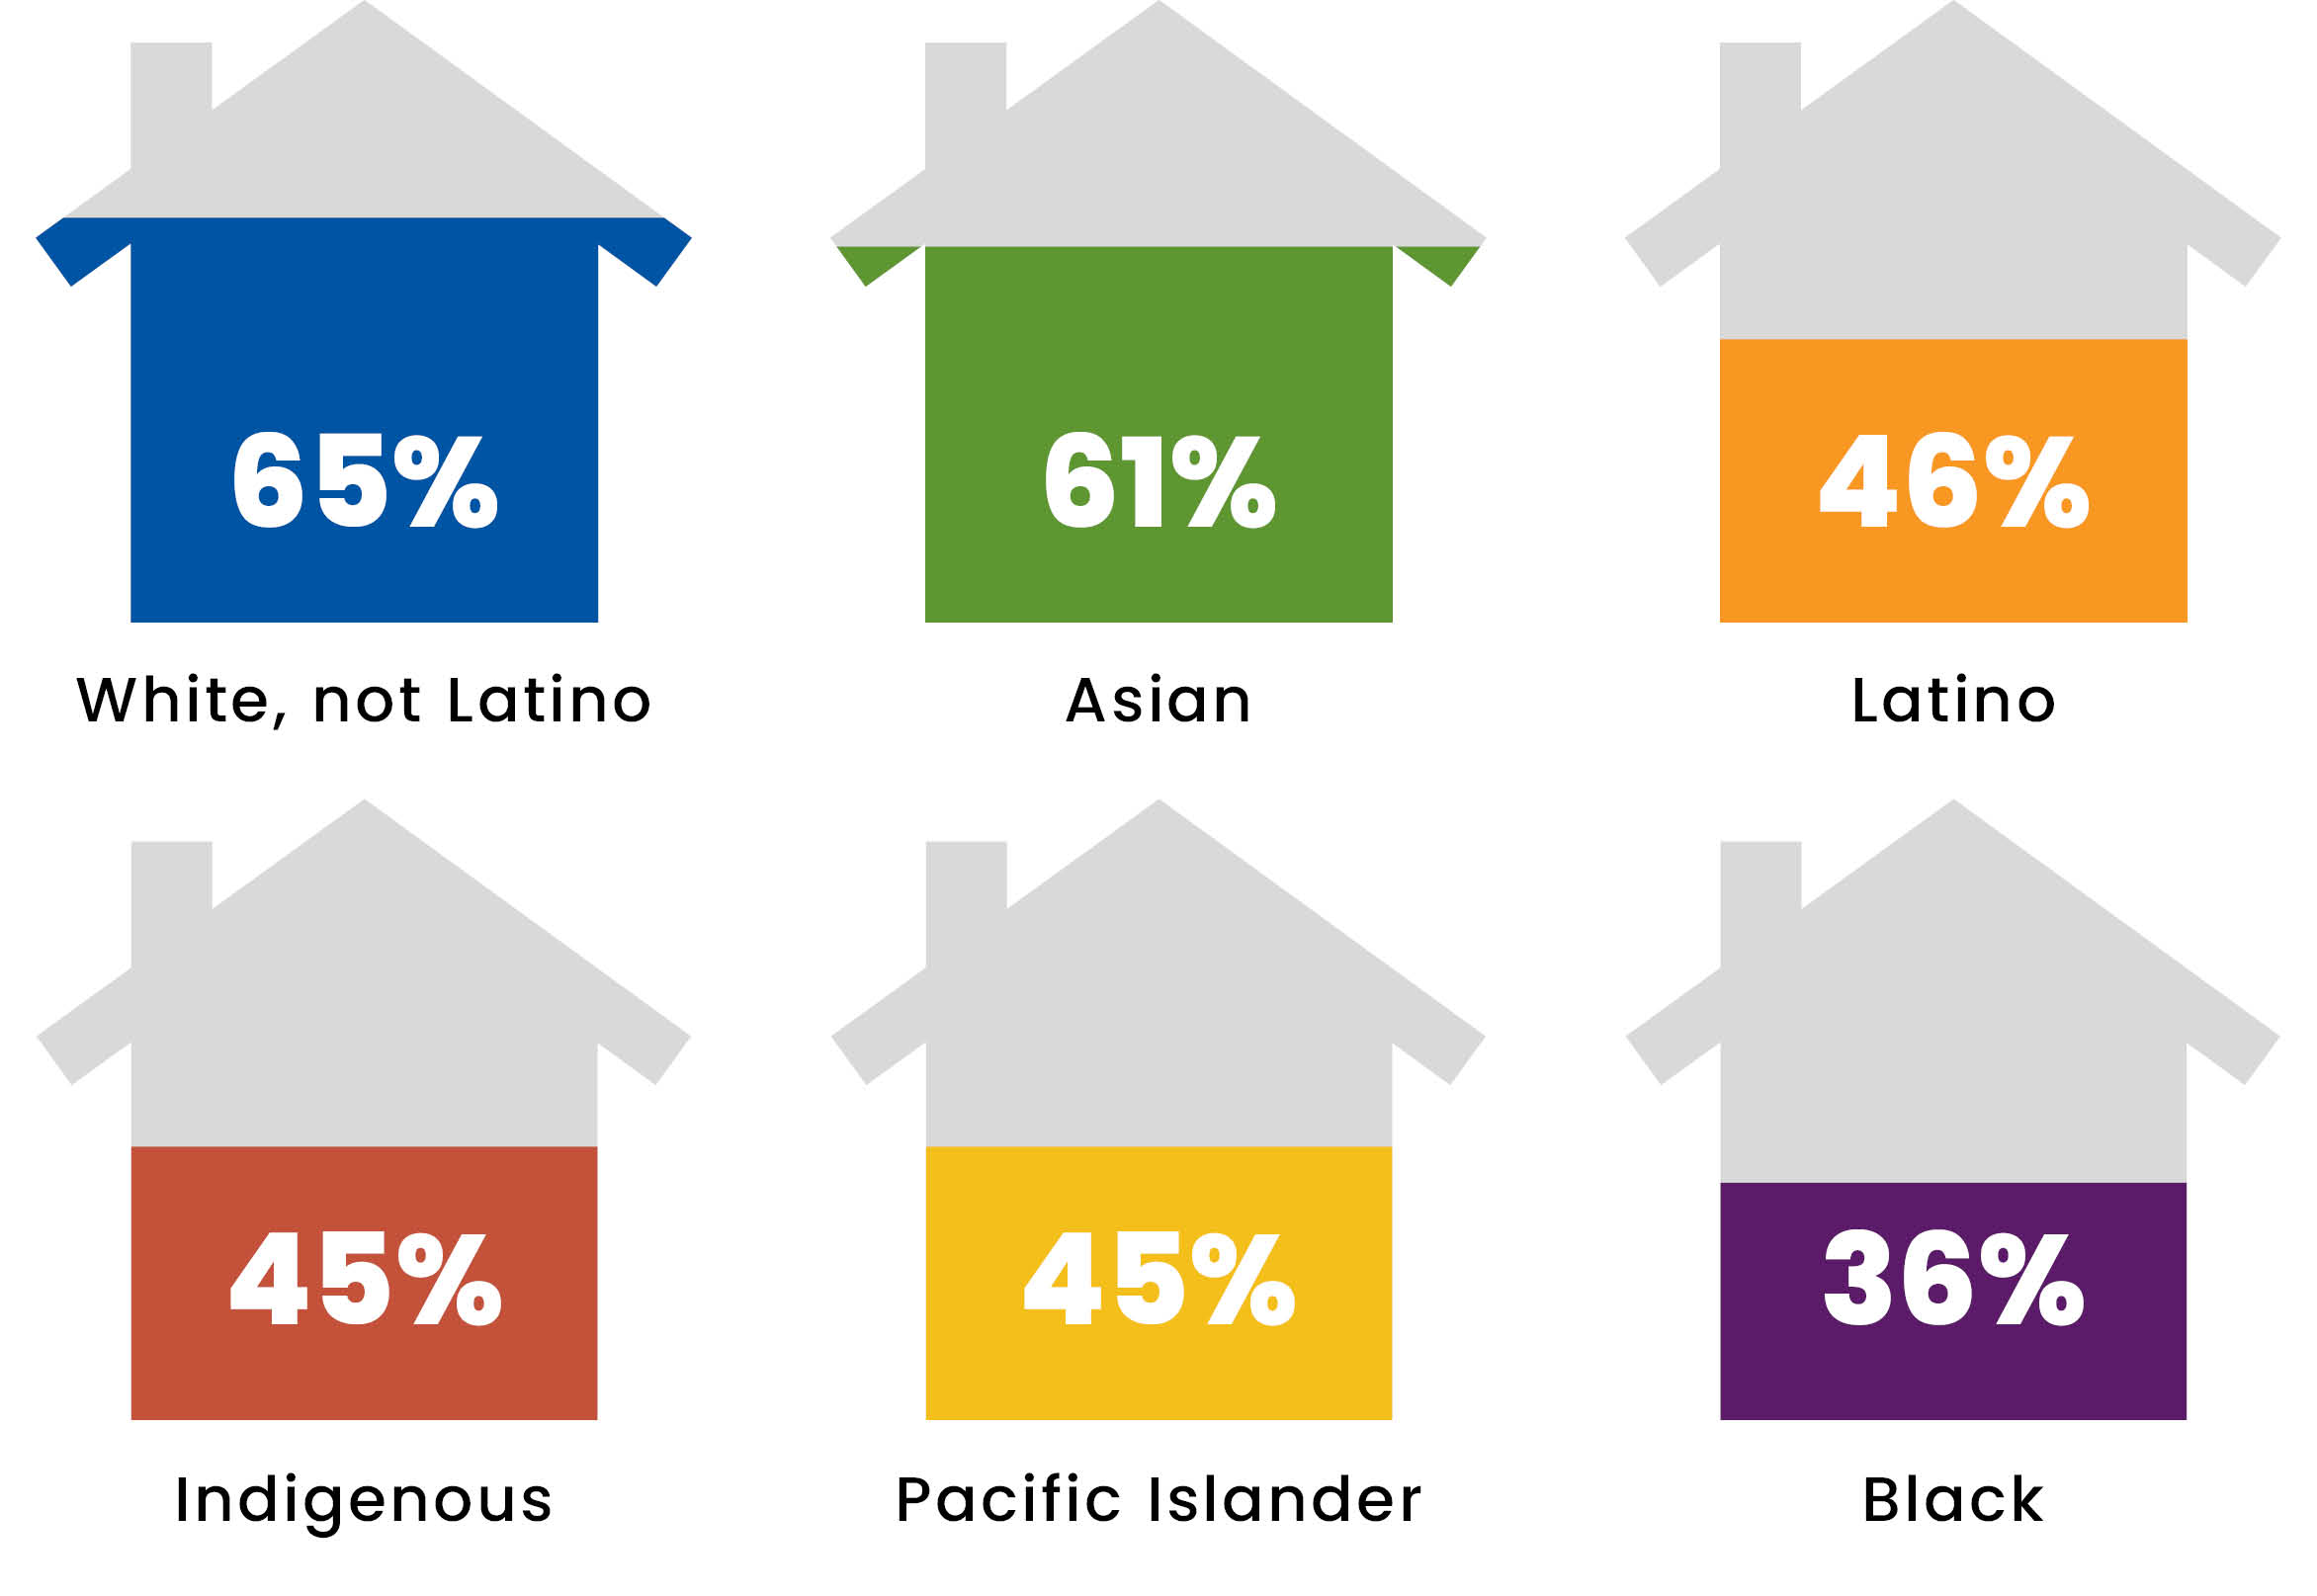 A chart utlizing housing to show the percentage of homeownership by race in California in 2019: the 65% of the white non-Latino population were homeowners, 61% of the Asian population were homeowners, 46% of the Latino population were homeowners, 45% of the Native American population were homeowners, 45% of the Pacific Islander population were homeowners, and 36% of the Black population were homeowners.